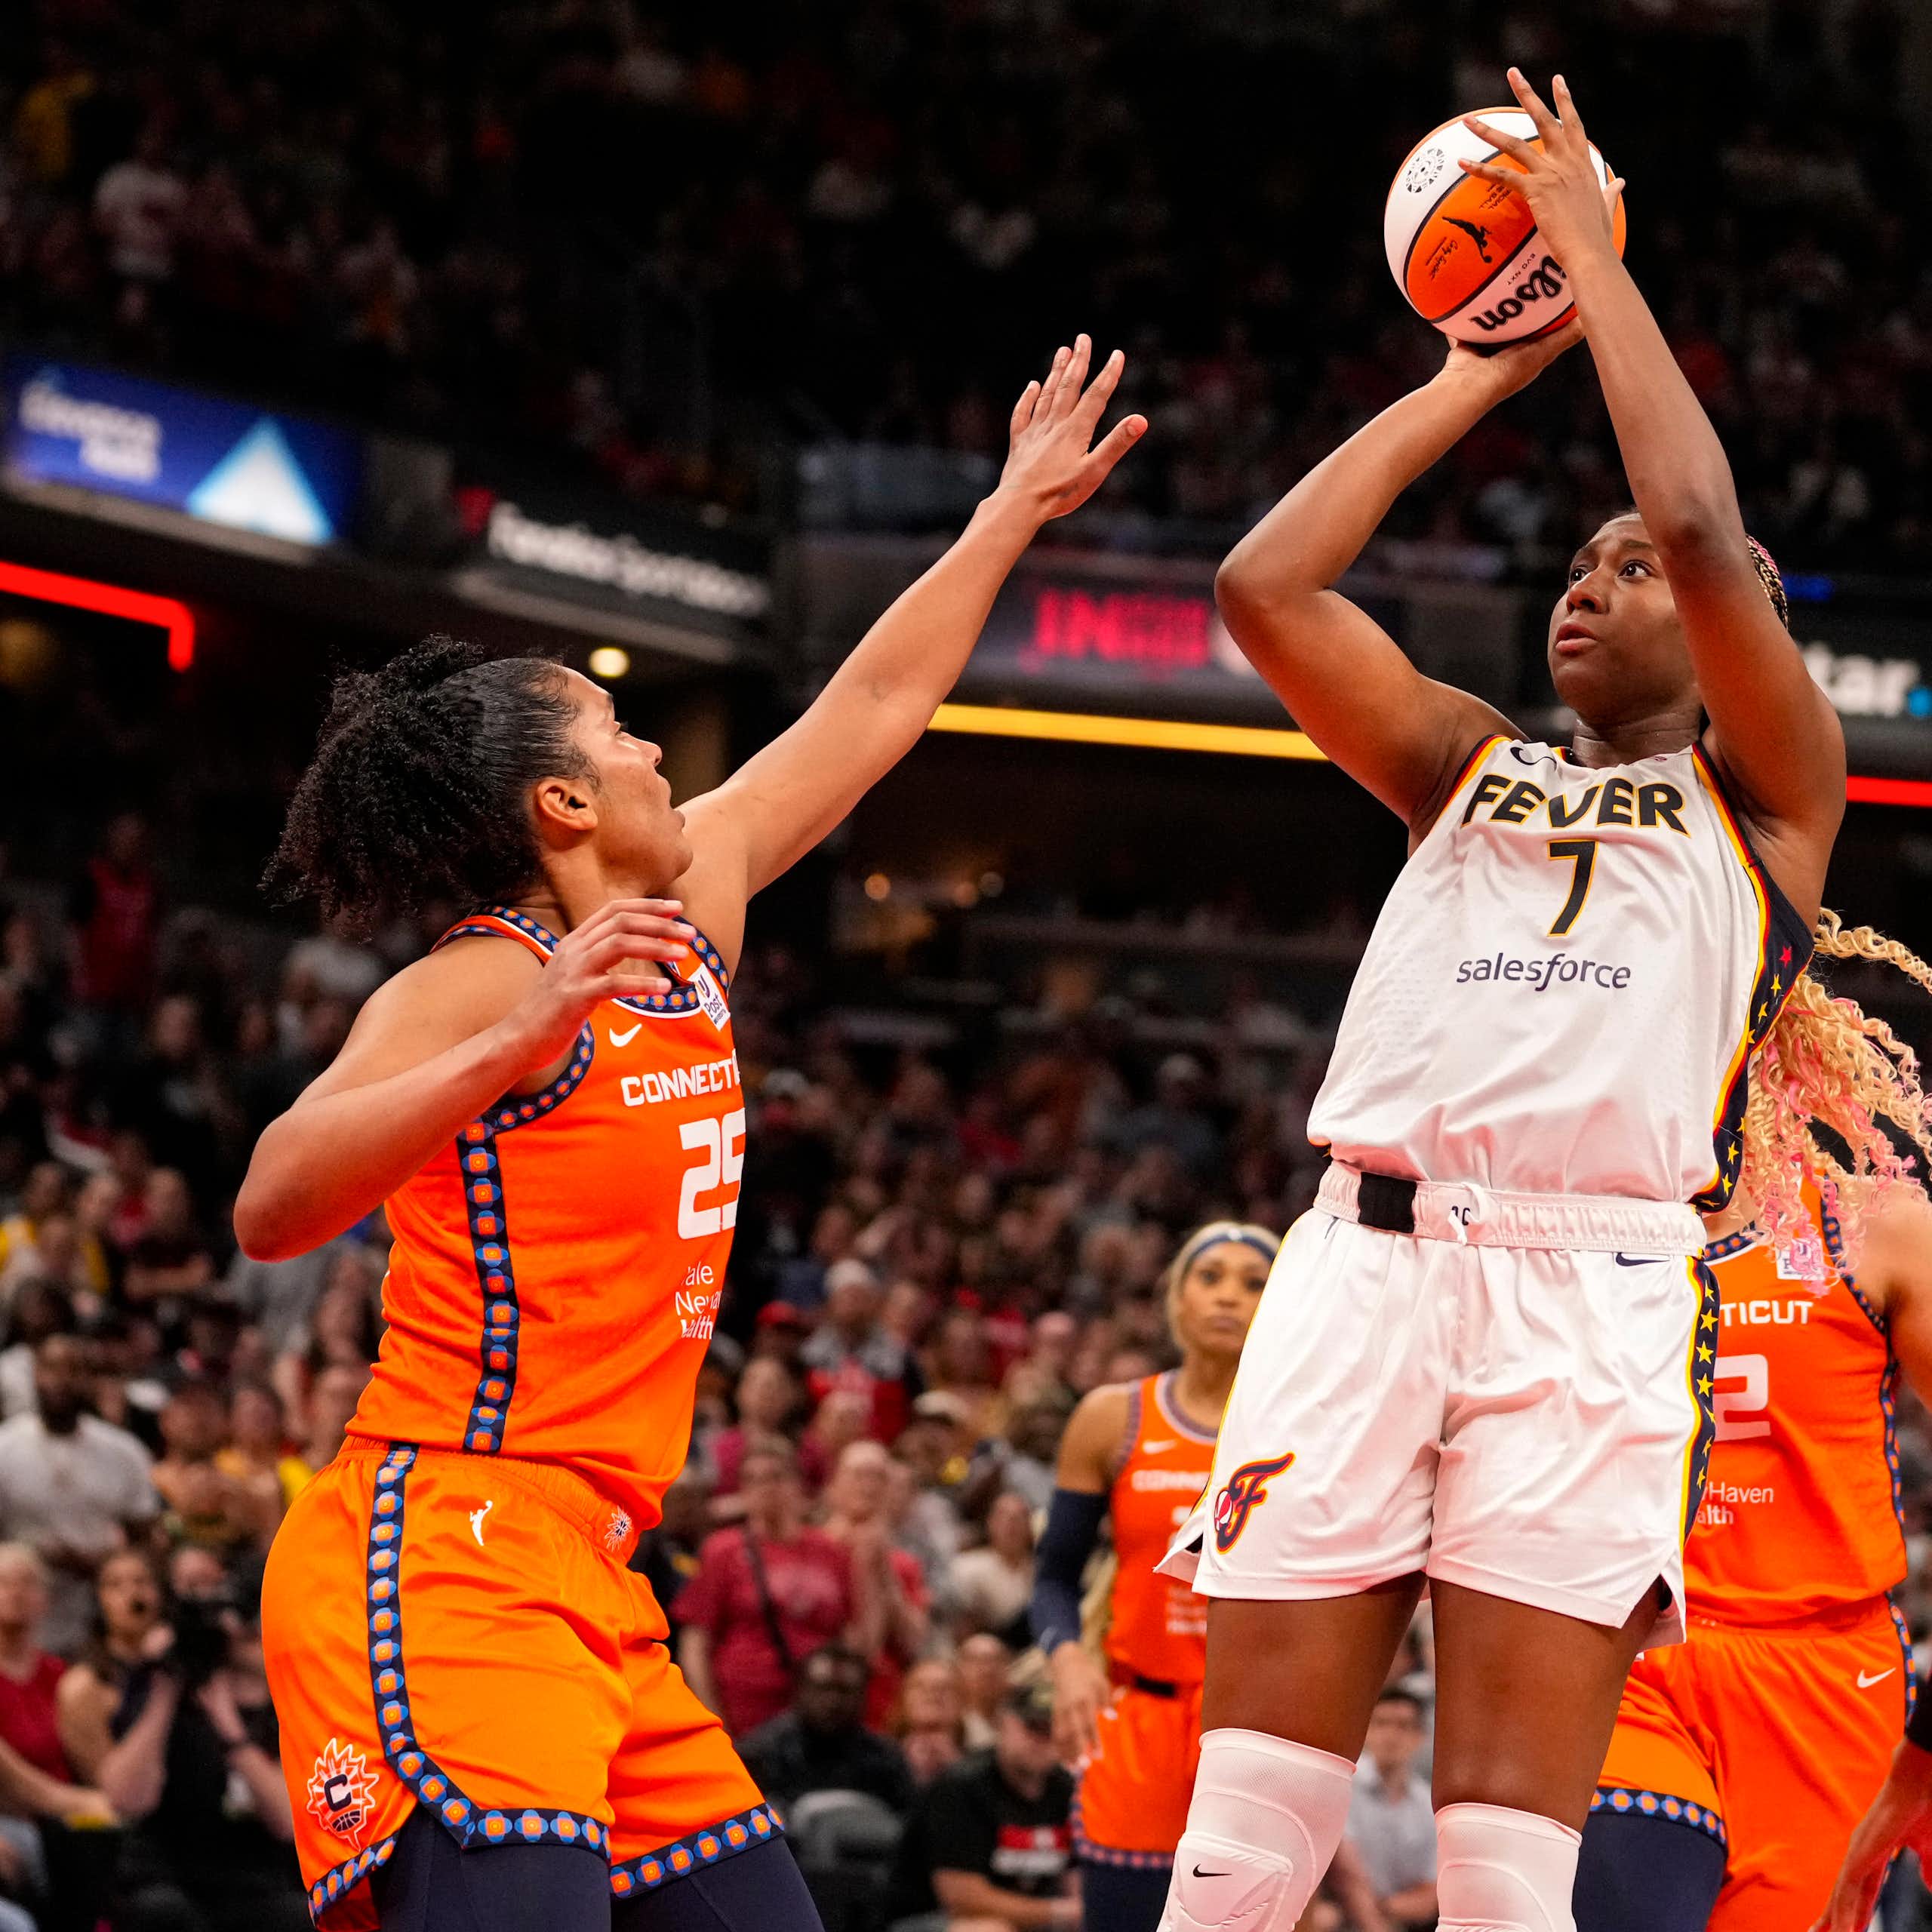 A Black woman in a basketball uniform jumps while doing a layup. Another woman reaches up to try and block the shot.